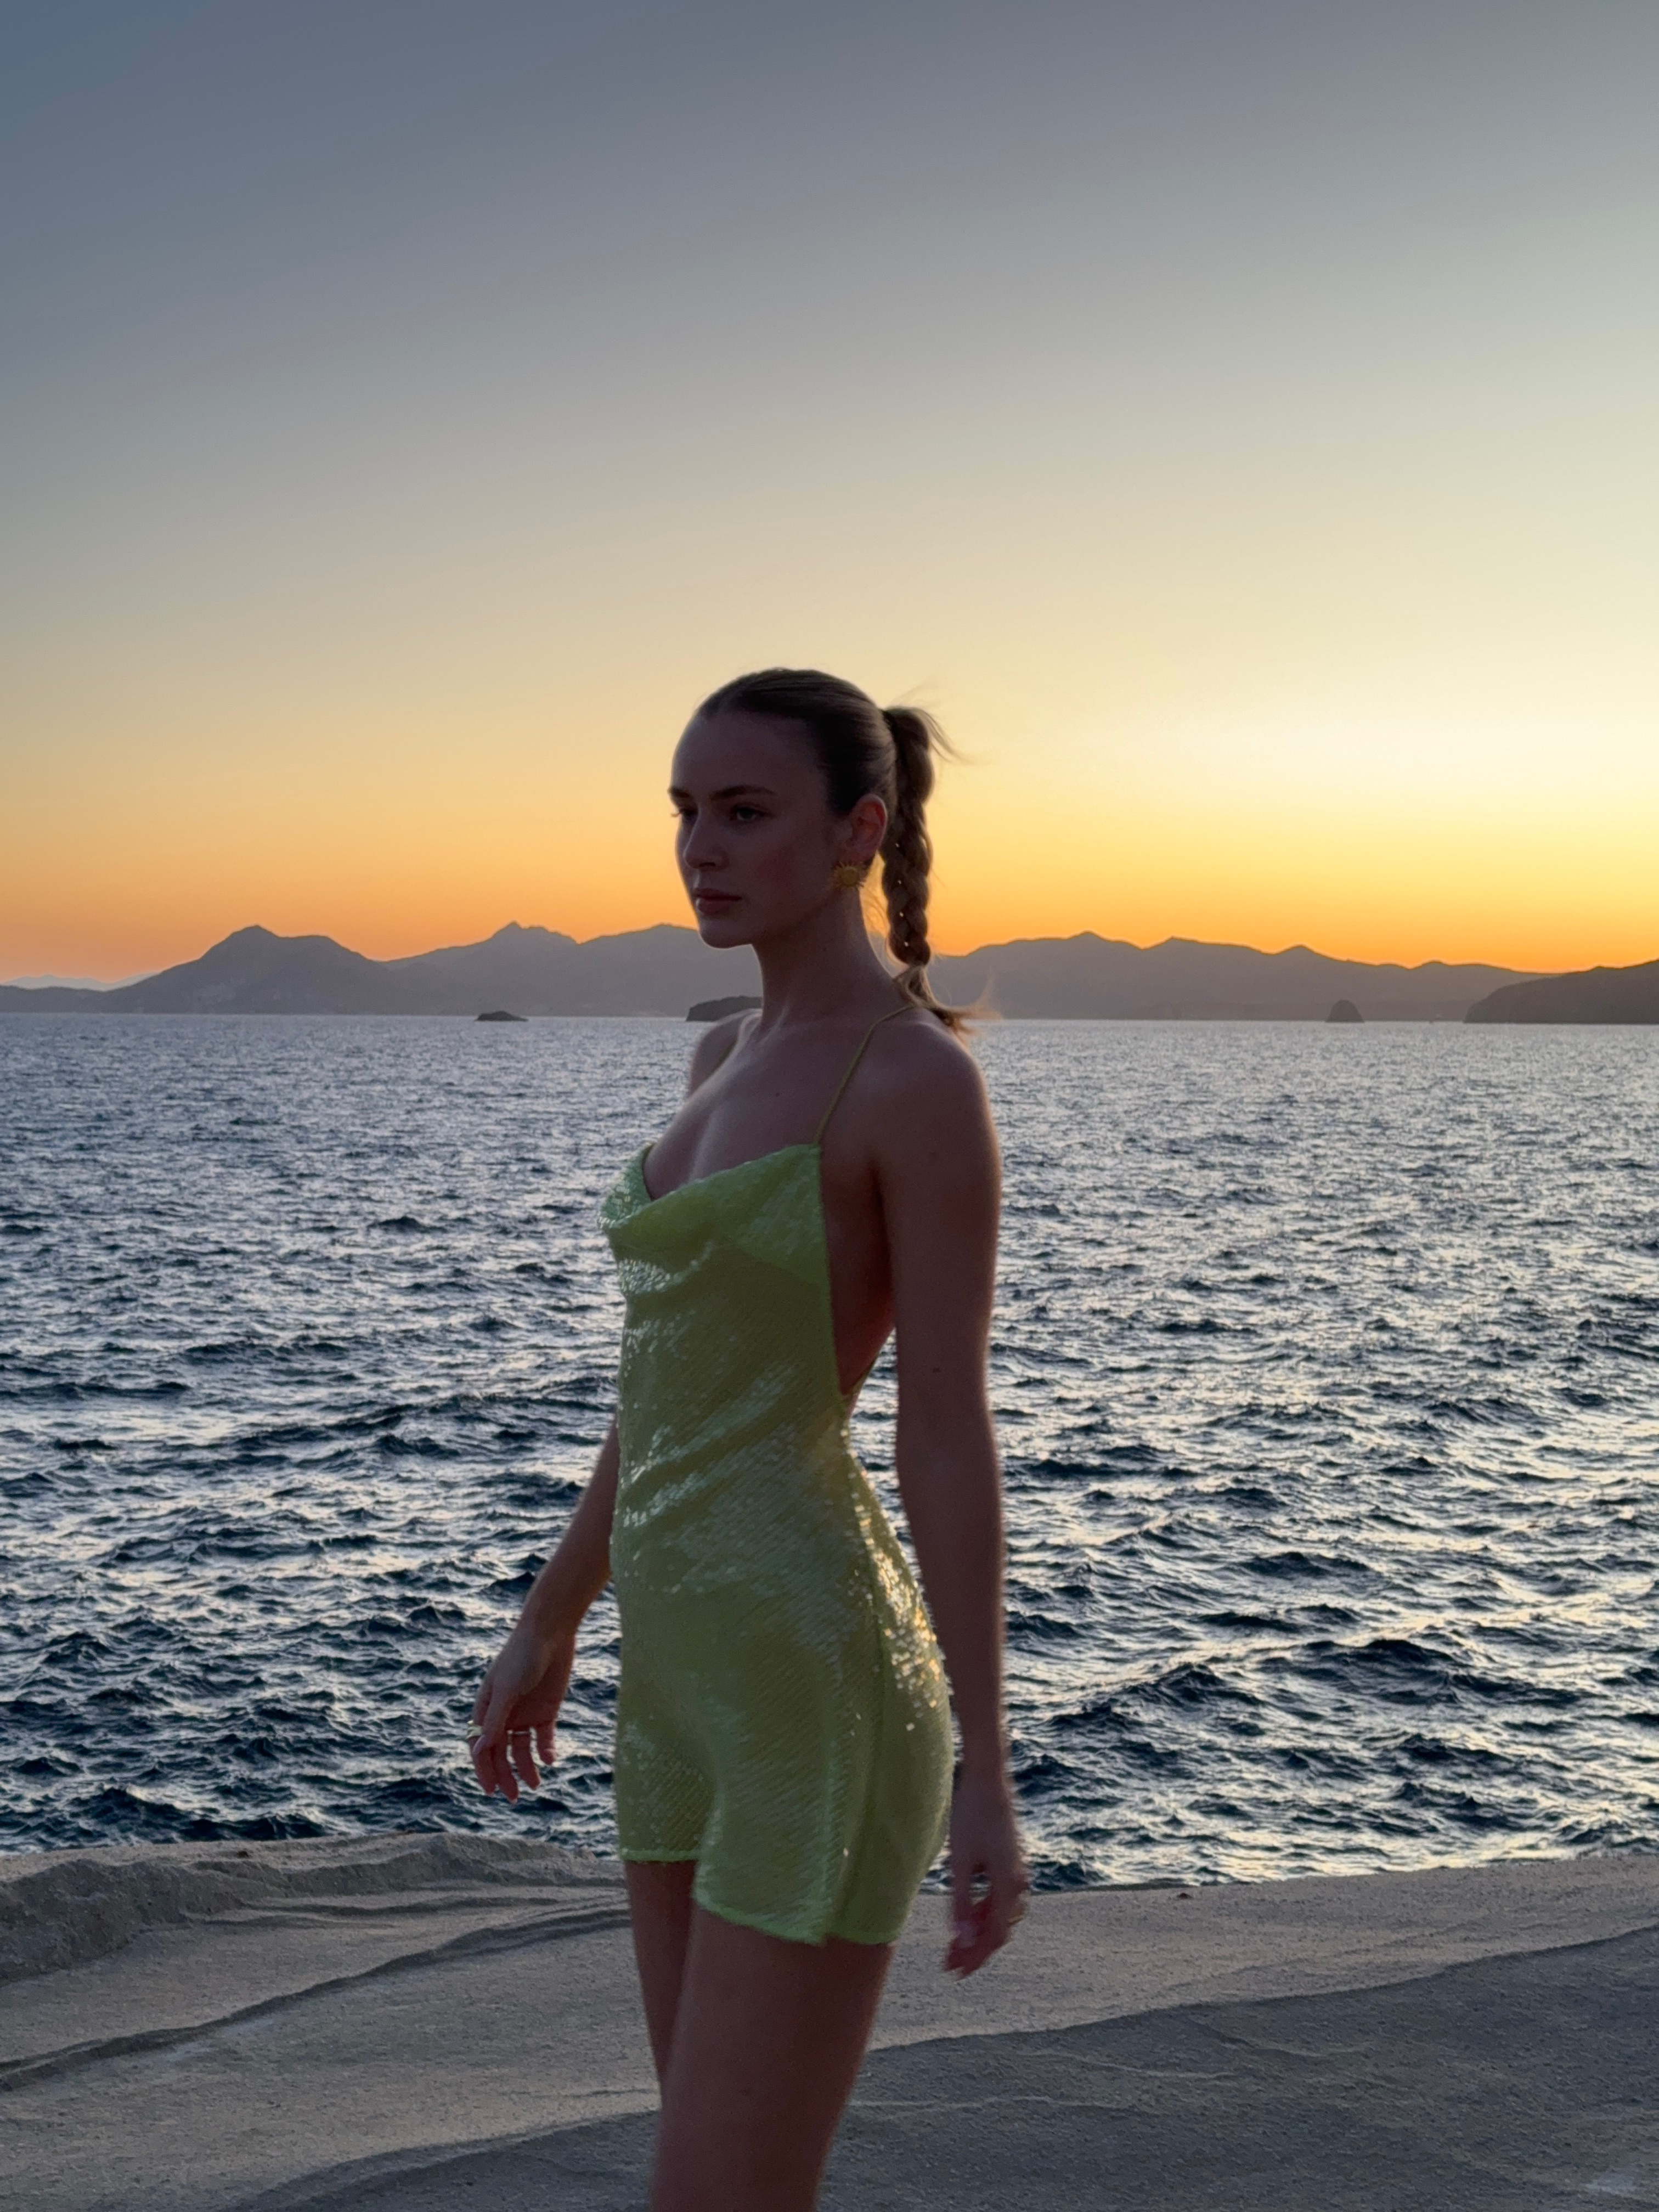 Our social media manager stands gracefully near the beach in a stunning green shimmery resort wear dress, exuding seaside elegance with a different pose.